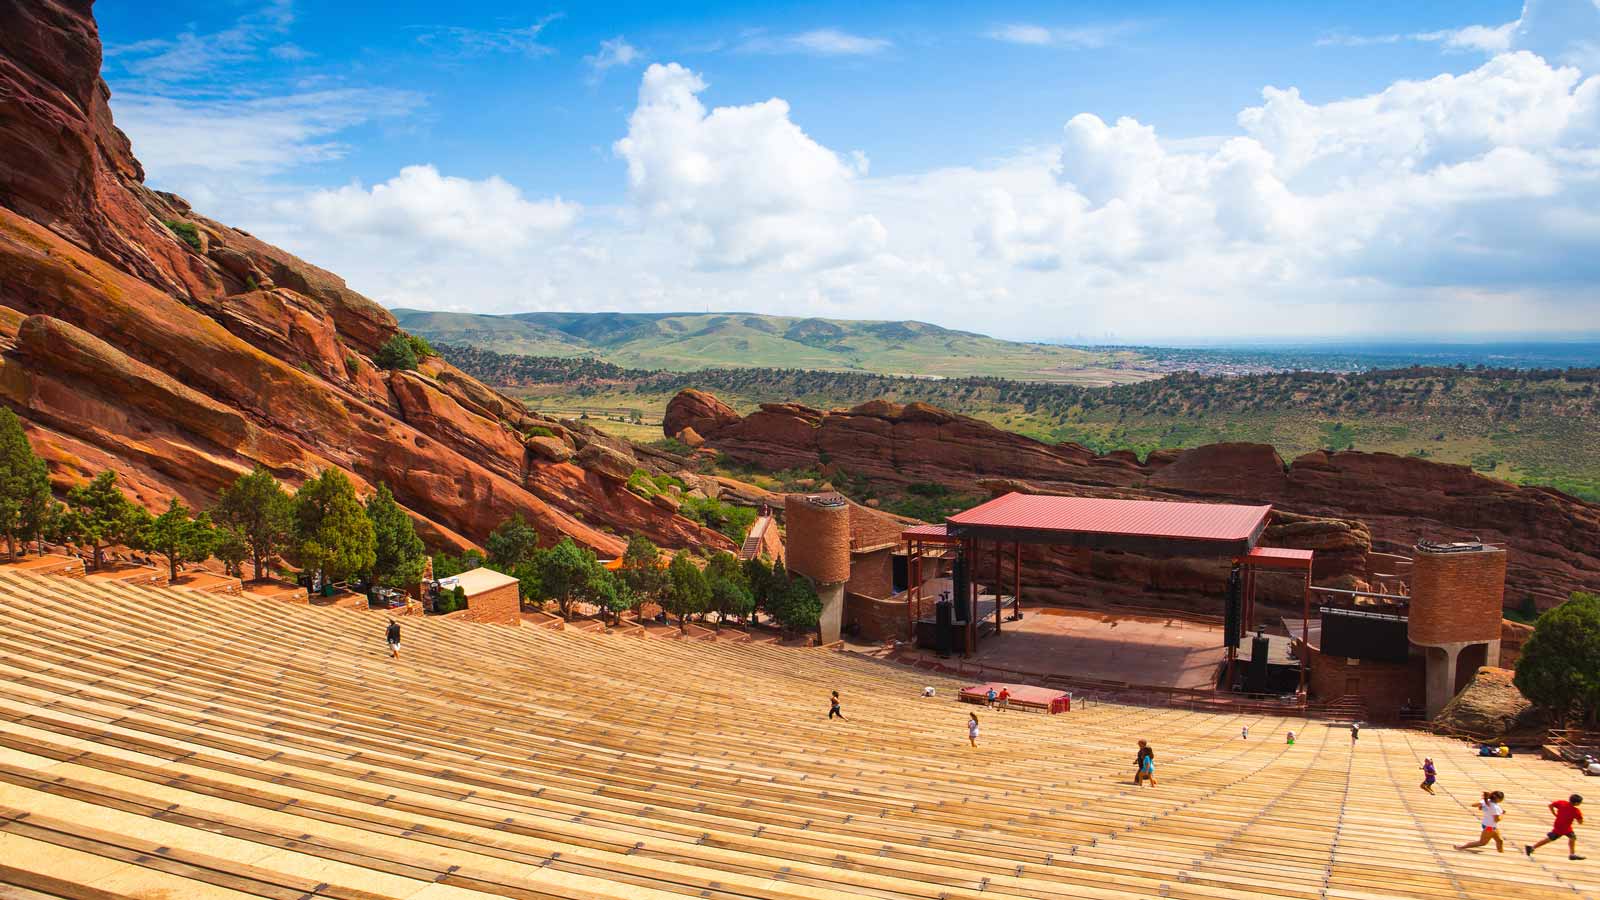 <p>Ask any local, and they’ll tell you that one of the coolest things to do in Colorado is catch a concert at <a href="https://www.redrocksonline.com/" rel="nofollow noopener">Red Rocks Amphitheatre</a>. This outdoor venue is surrounded by striking red sandstone walls, thriving greenery, and the occasional deer. Add the incredible performers to the mix, and things are on a whole new level.</p><p>In the past, Red Rocks has hosted many musical masters. From The Beatles and Louis Armstrong to The Lumineers and Wiz Khalifa, performance masters from all genres have graced this nature-inspired stage. I have seen quite a few concerts myself.</p>